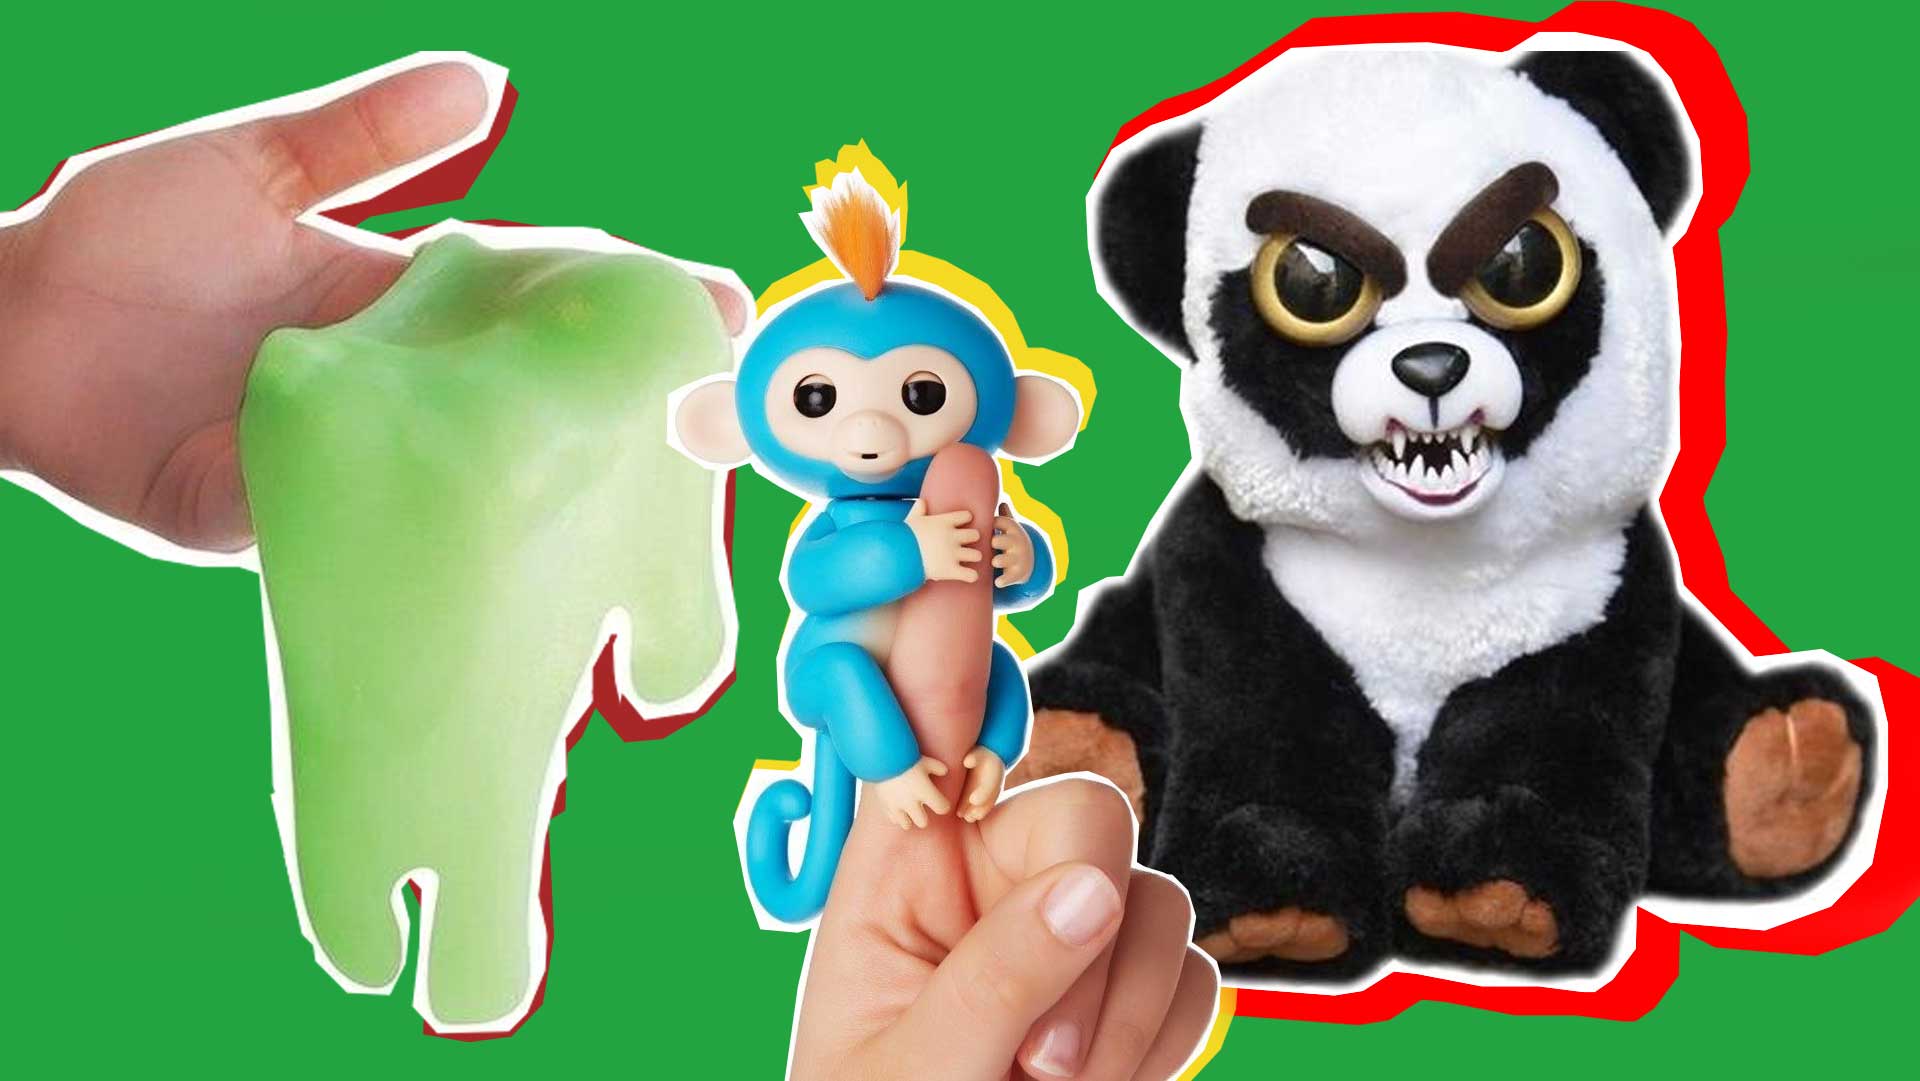 These are the top 10 toys for Christmas 2017